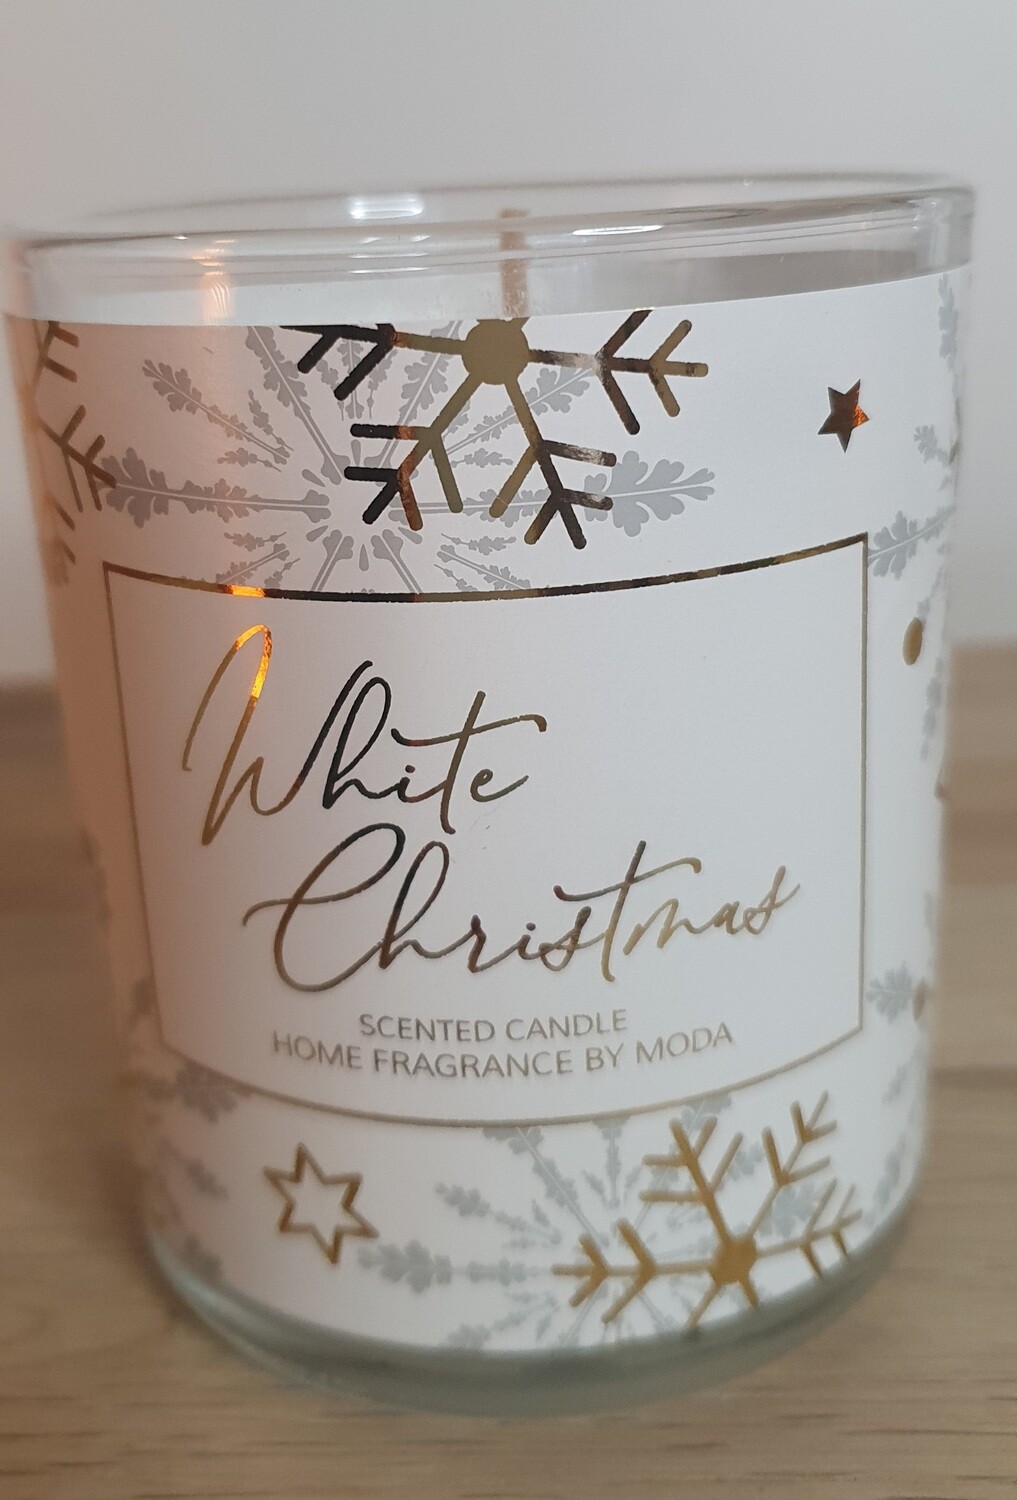 Scented Candle "White Christmas"